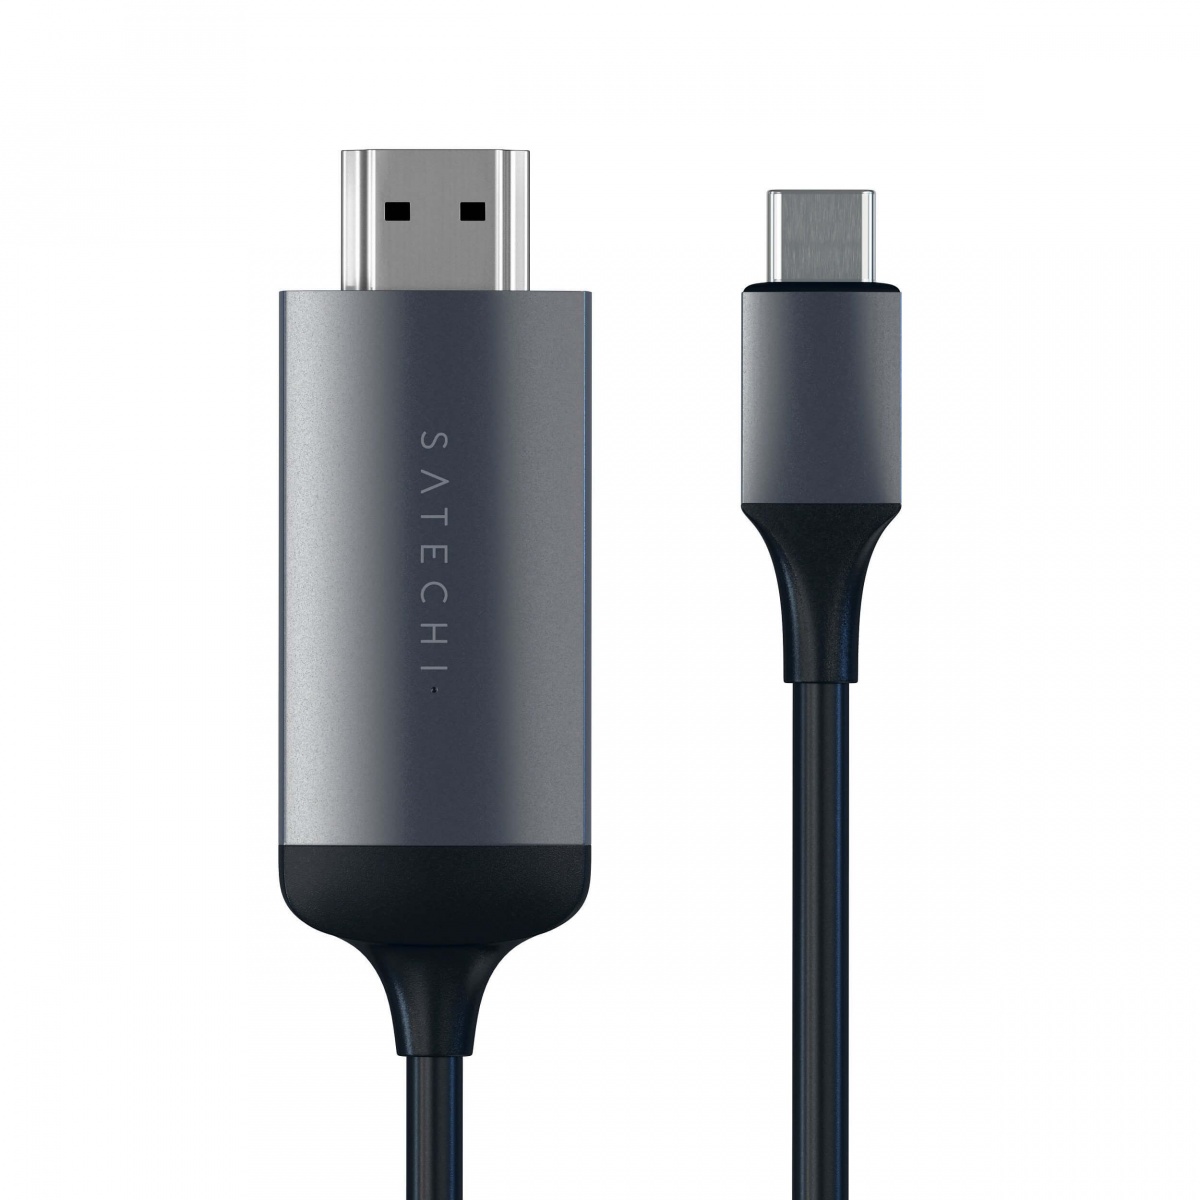 SATECHI – Cable USB Type-C vers HDMI 4K @60Hz Gris Anthracite